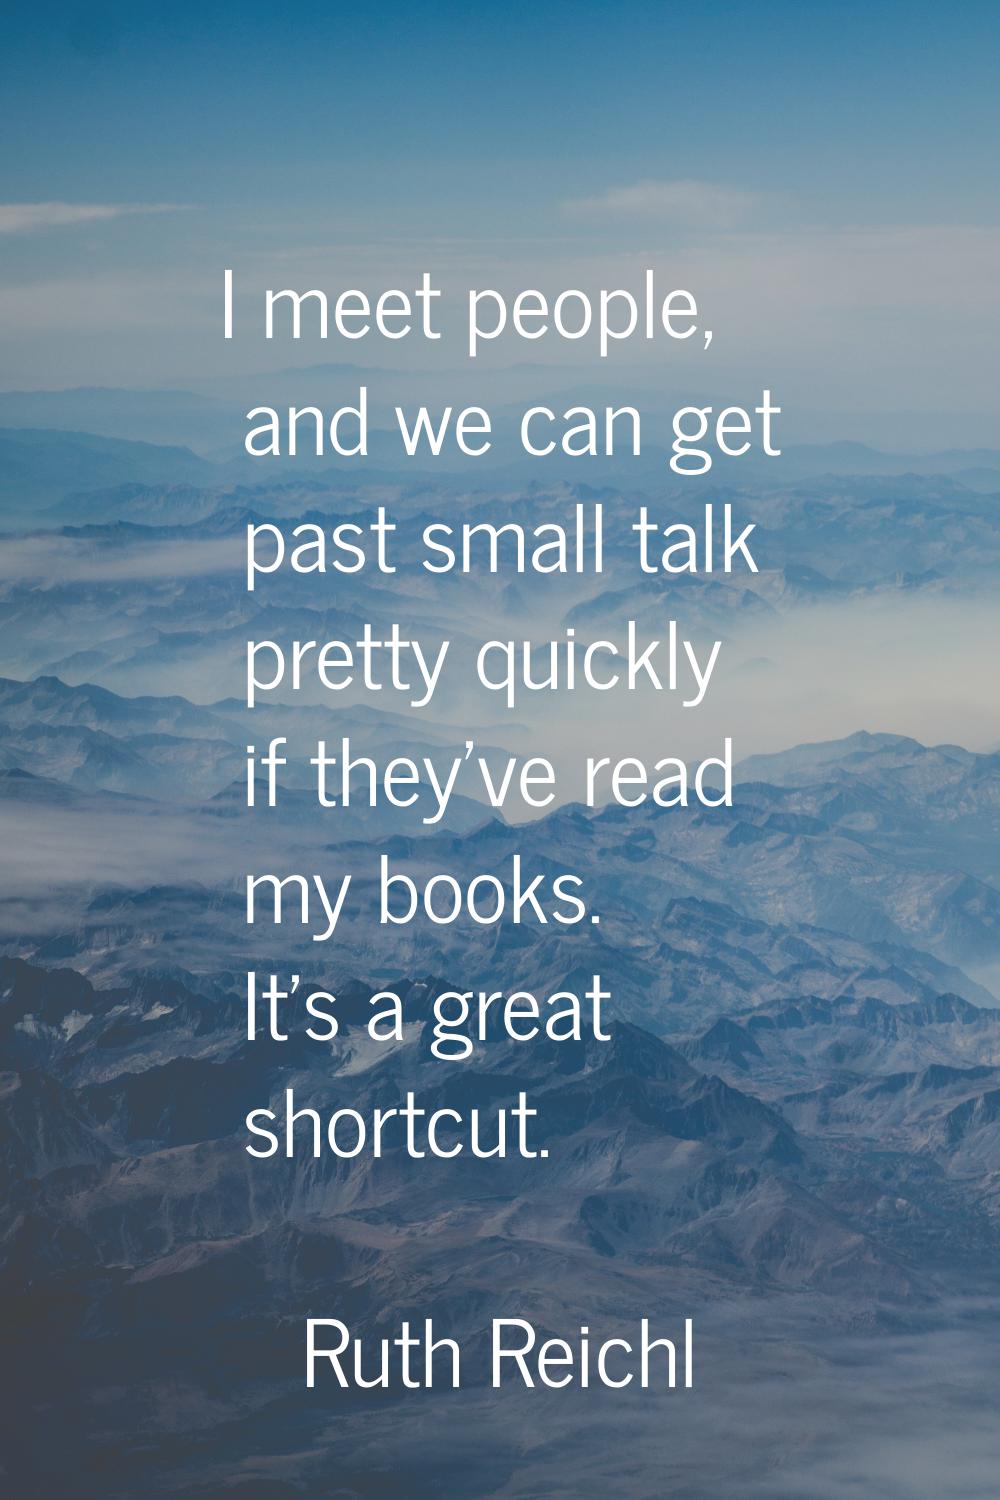 I meet people, and we can get past small talk pretty quickly if they've read my books. It's a great